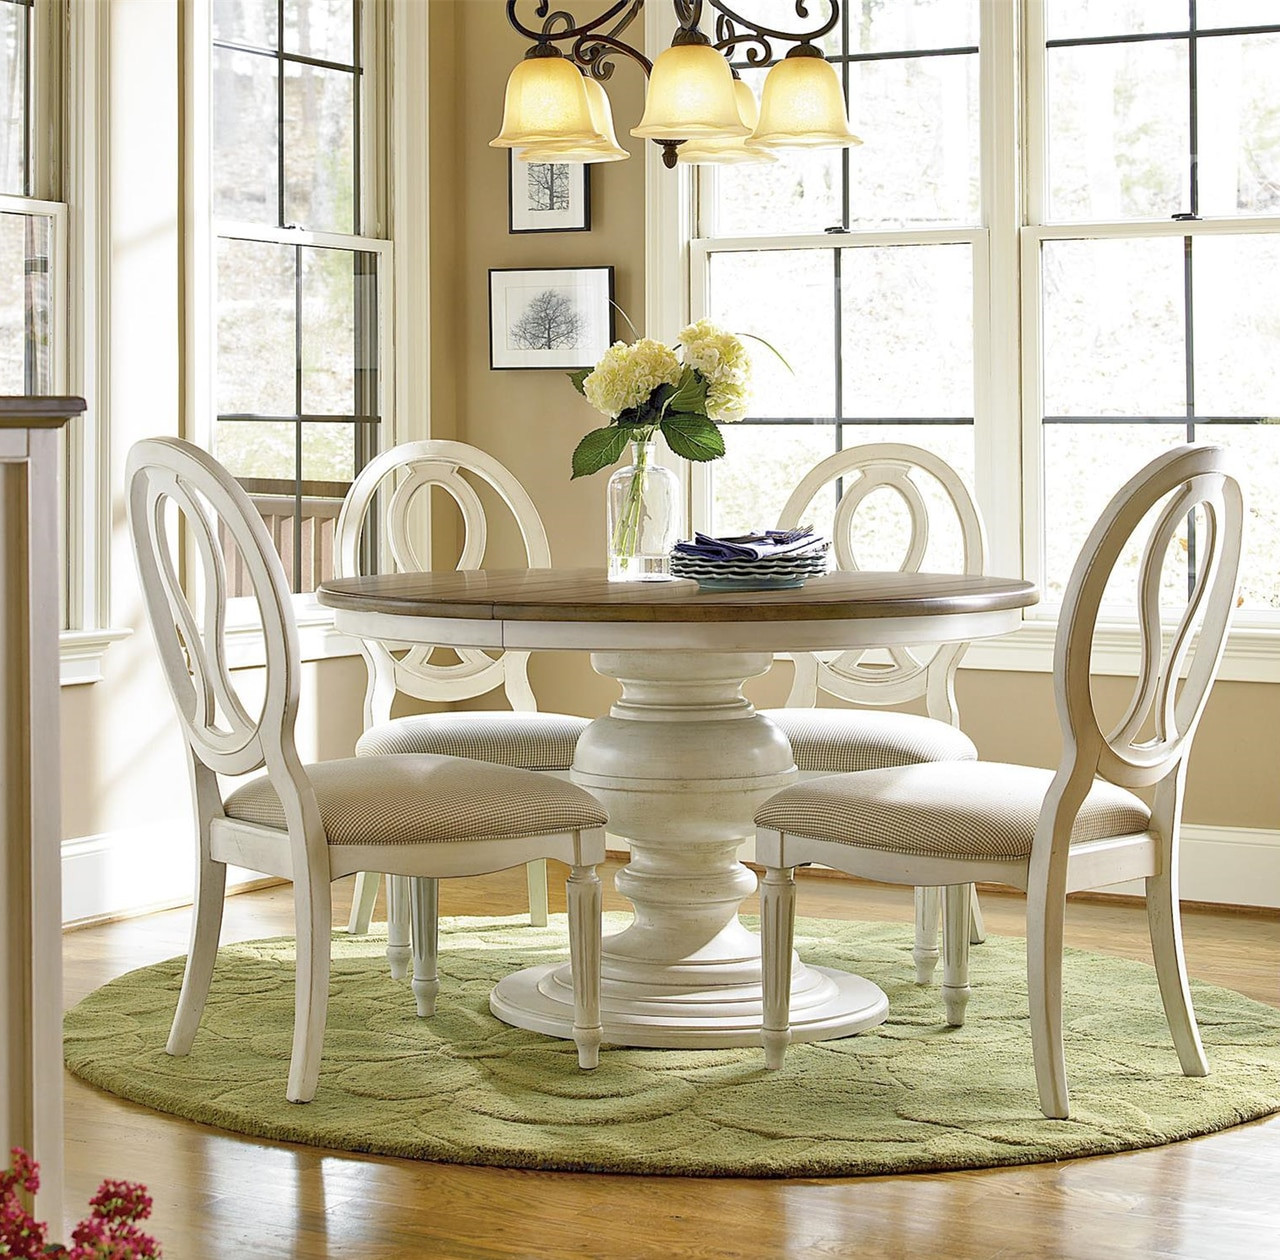 White And Wood Kitchen Table
 Country Chic 5 Piece Round White Dining Table Set